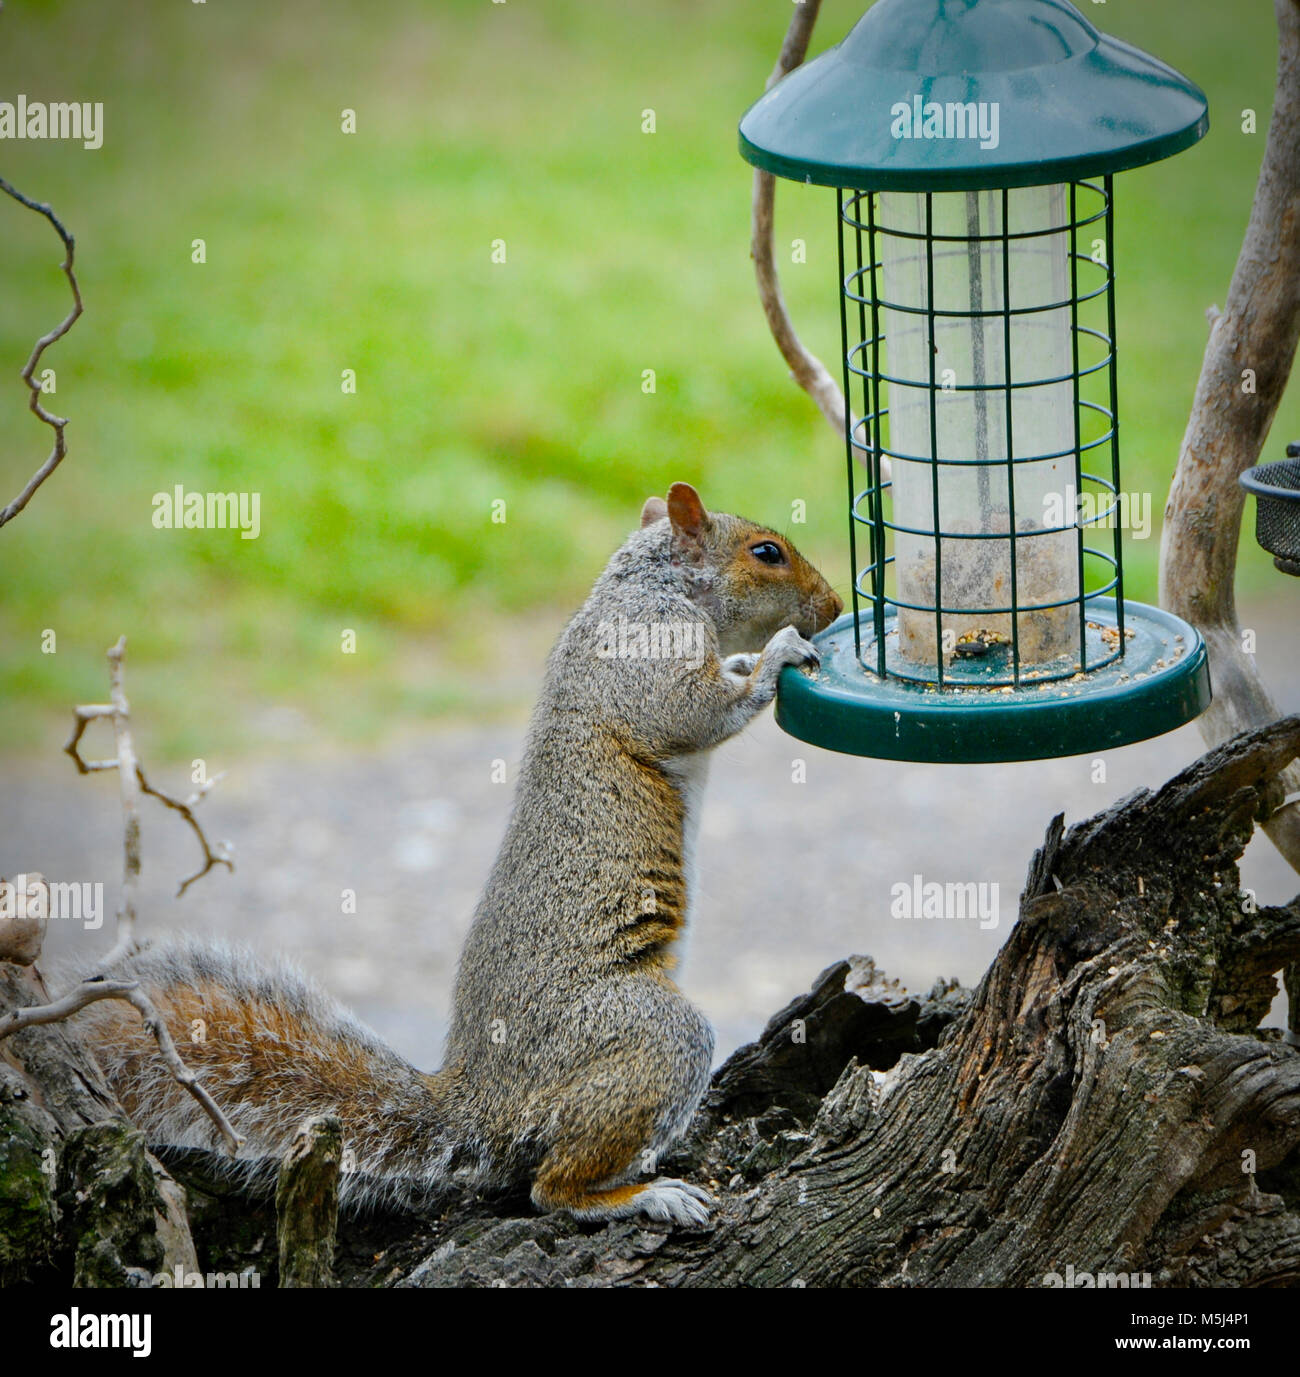 Sciurus carolinensis, common name eastern gray squirrel or grey squirrel depending on region, is a tree squirrel in the genus Sciurus. It is native to eastern North America, where it is the most prodigious and ecologically essential natural forest regenerator. Stock Photo